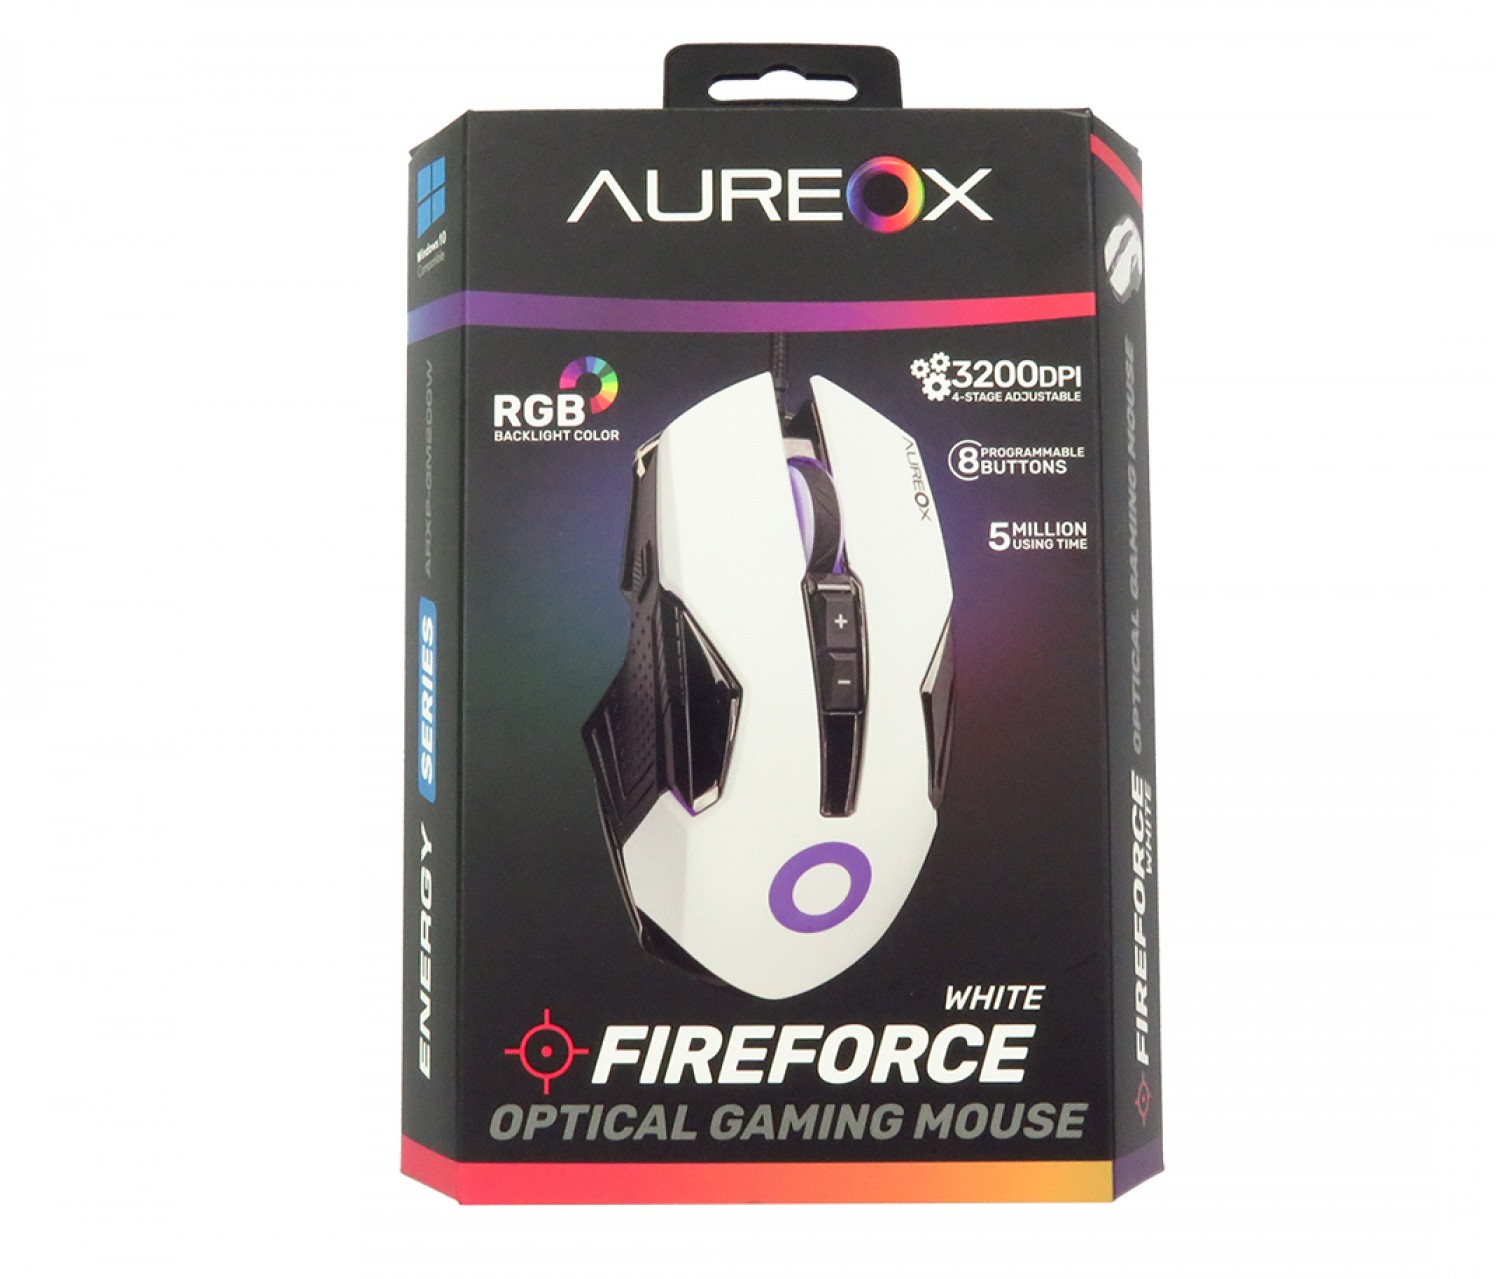 MOUSE AUREOX FIREFORCE WHITE GAMING GM200W